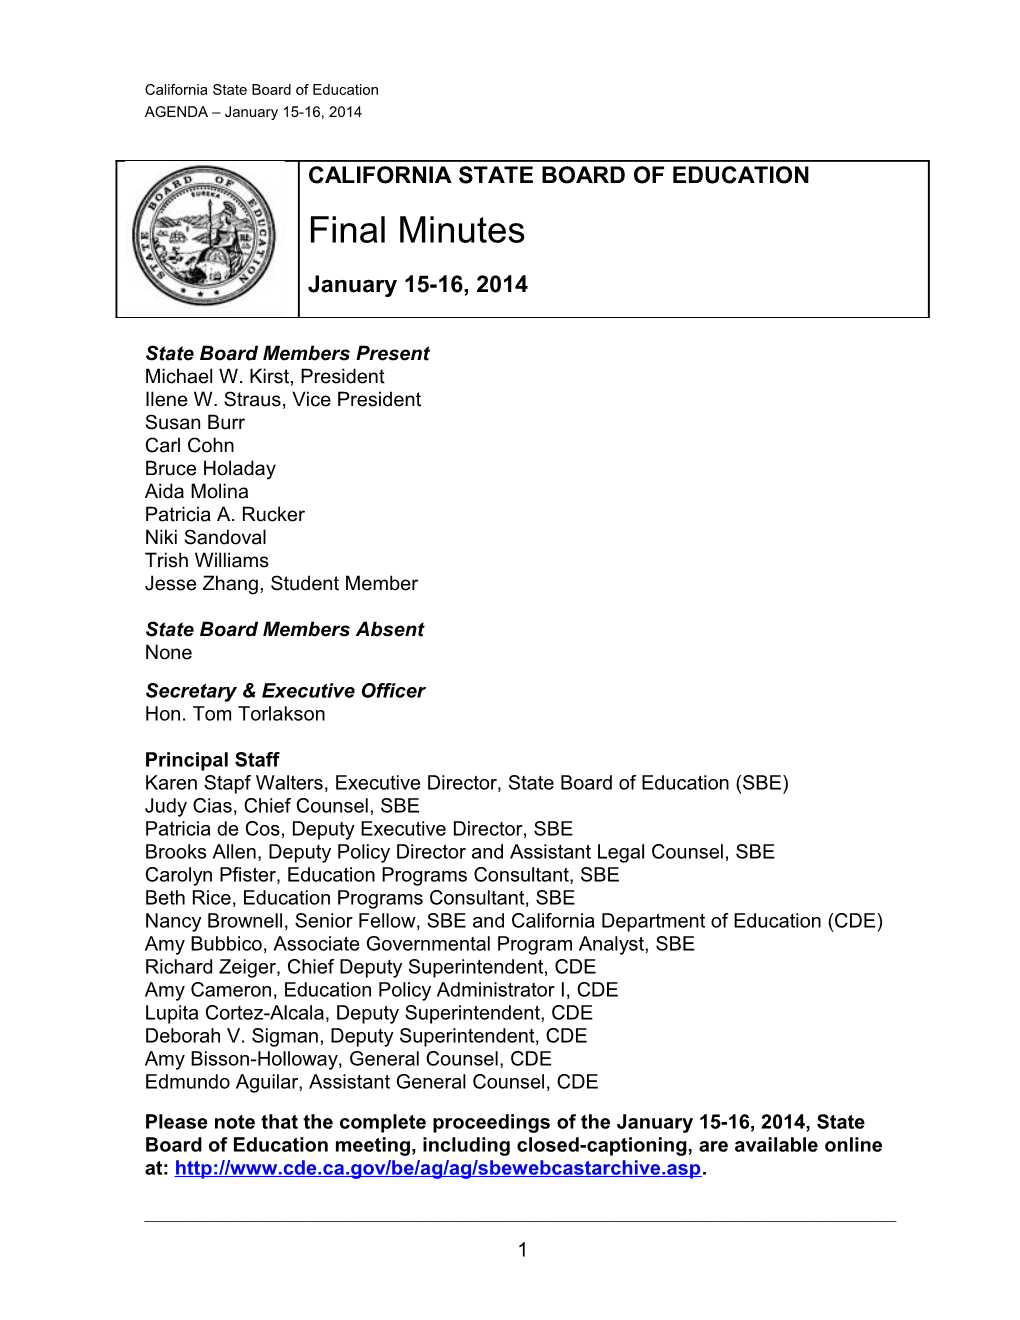 Final Minutes January 2014 - SBE Minutes (CA State Board of Education)